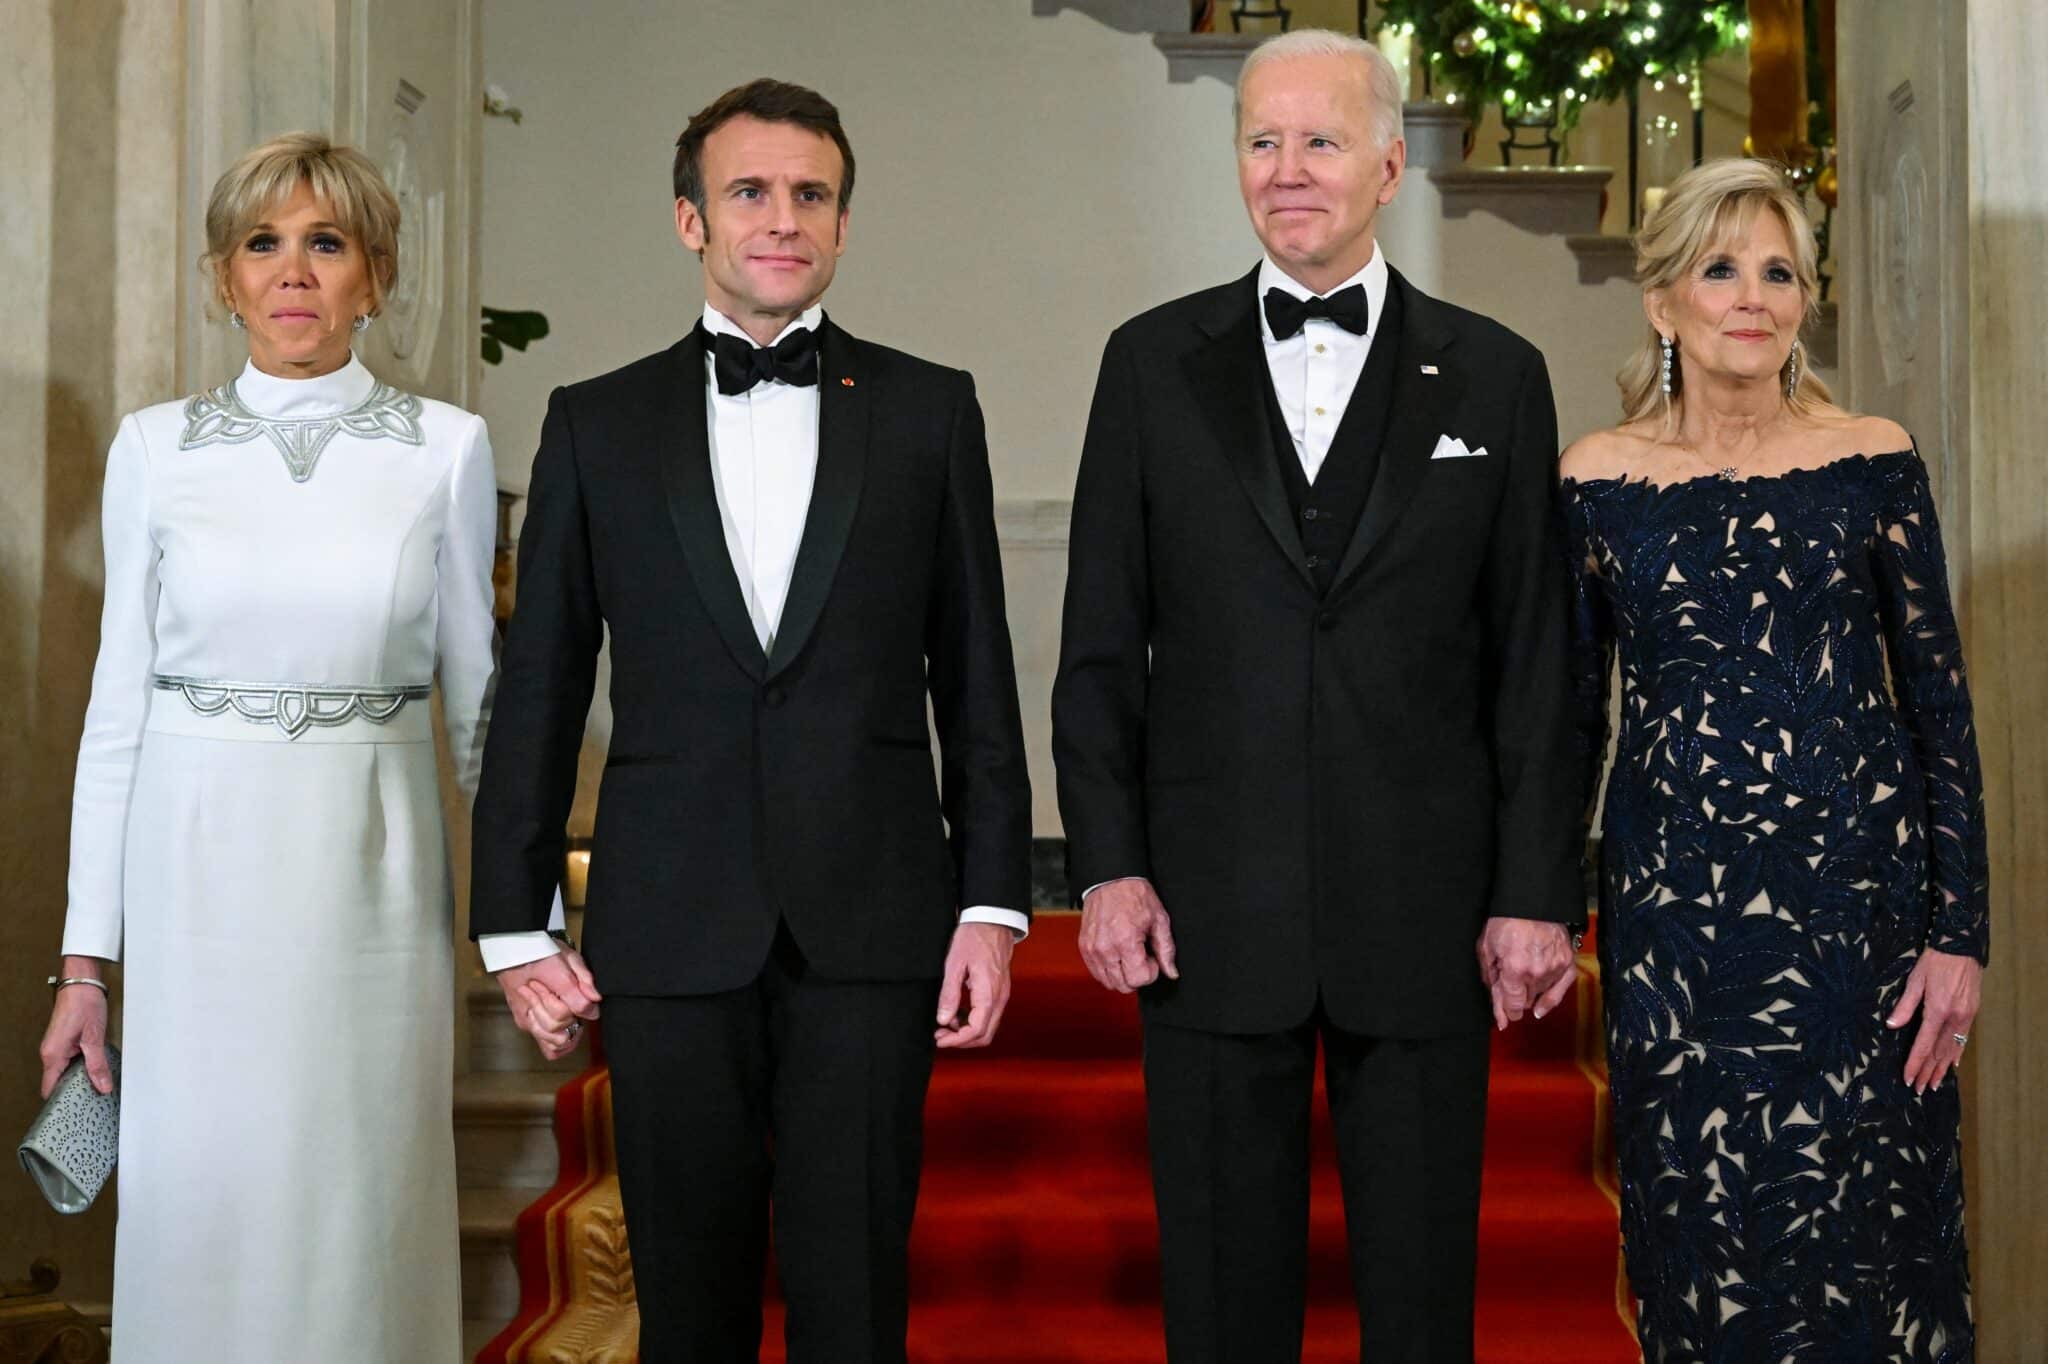 US President Joe Biden and First Lady Jill Biden welcome French President Emmanuel Macron and his wife Brigitte Macron to the White House for a state dinner in Washington, DC, on December 1, 2022. (Photo by SAUL LOEB / AFP) (Photo by SAUL LOEB/AFP via Getty Images)